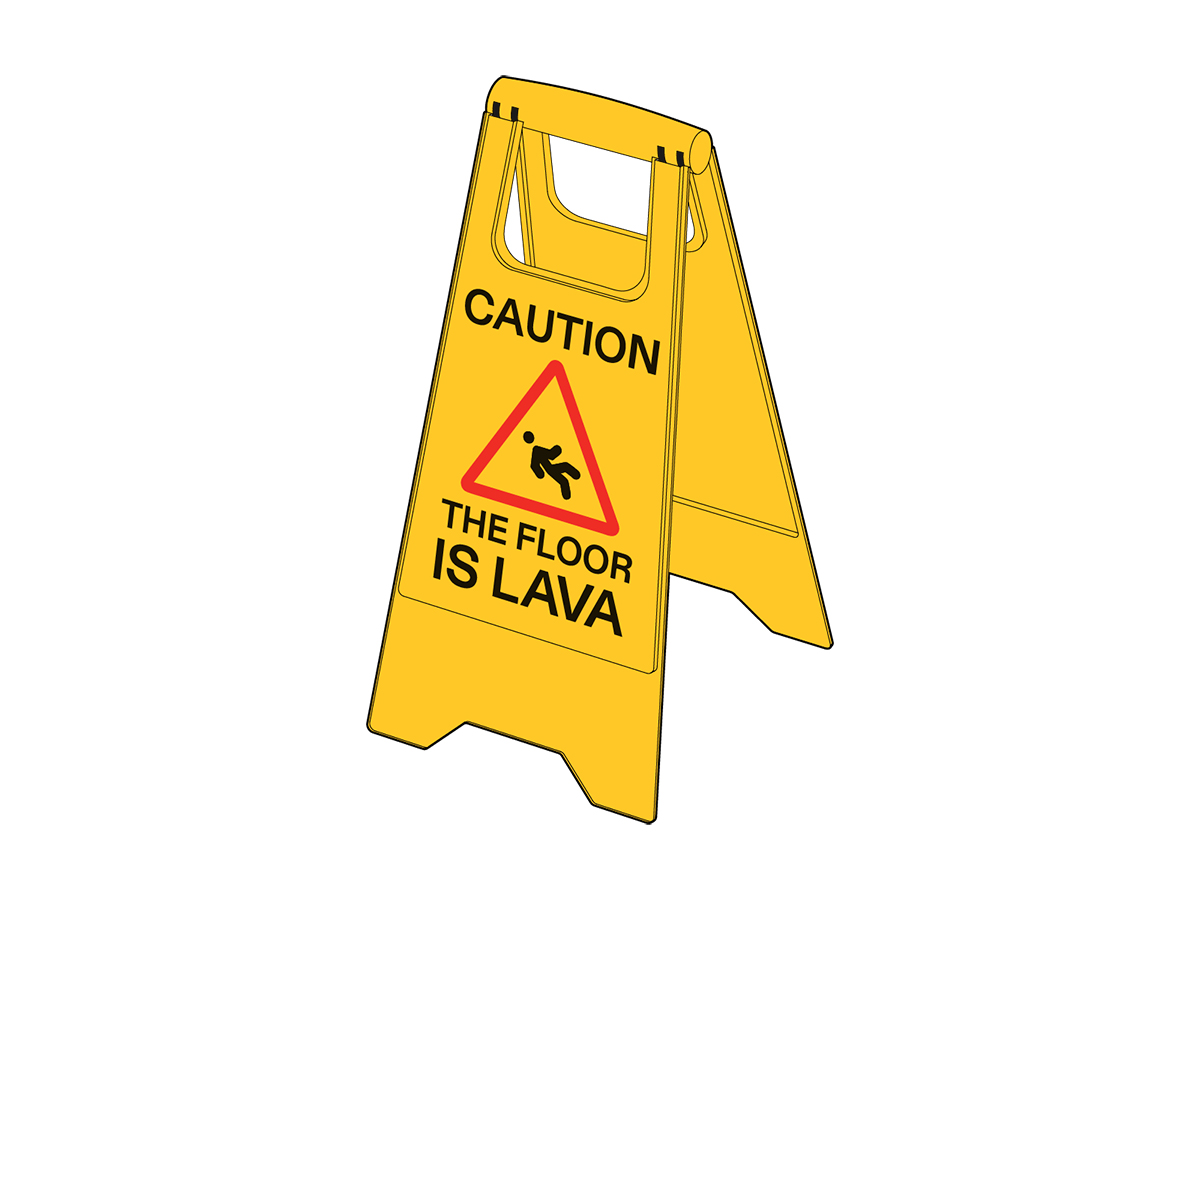 A floor sign that says, "Caution The Floor is Lava."